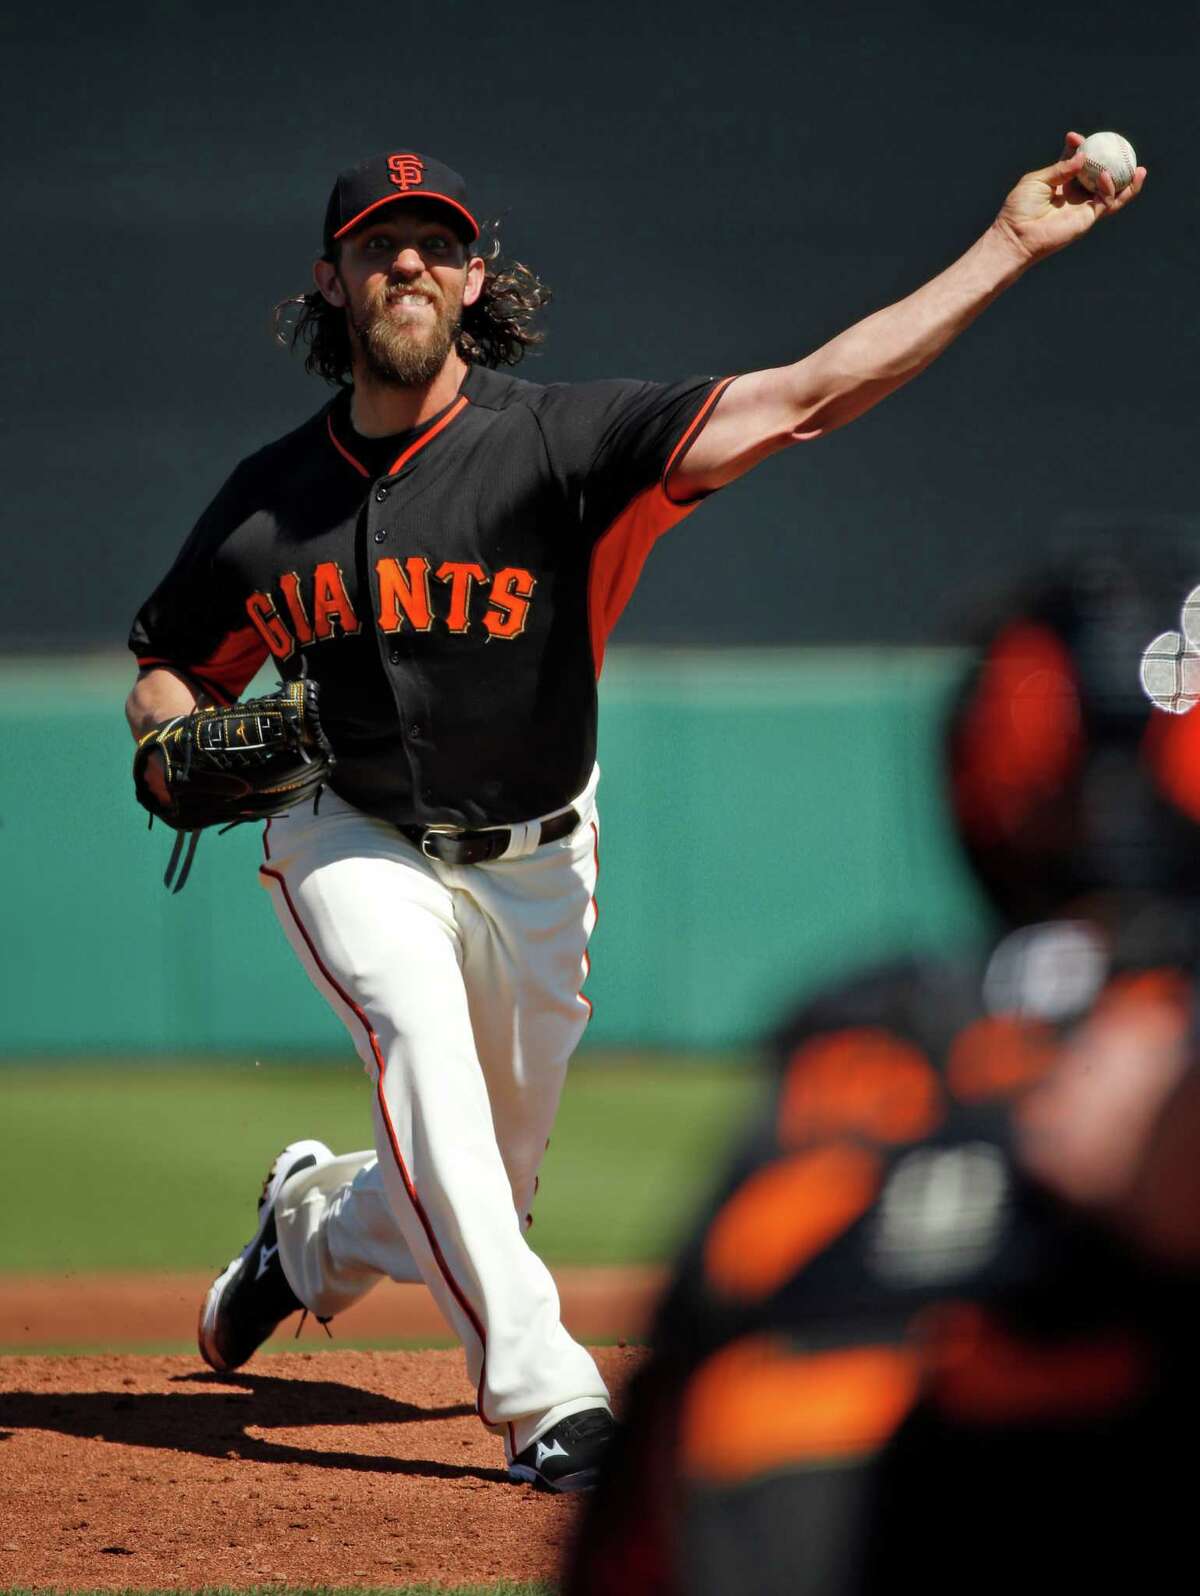 San Francisco Giants' Madison Bumgarner against San Diego Padres in Spring Training Cactus League game at Scottsdale Stadium in Scottsdale, Arizona, on Saturday, March 7, 2015.